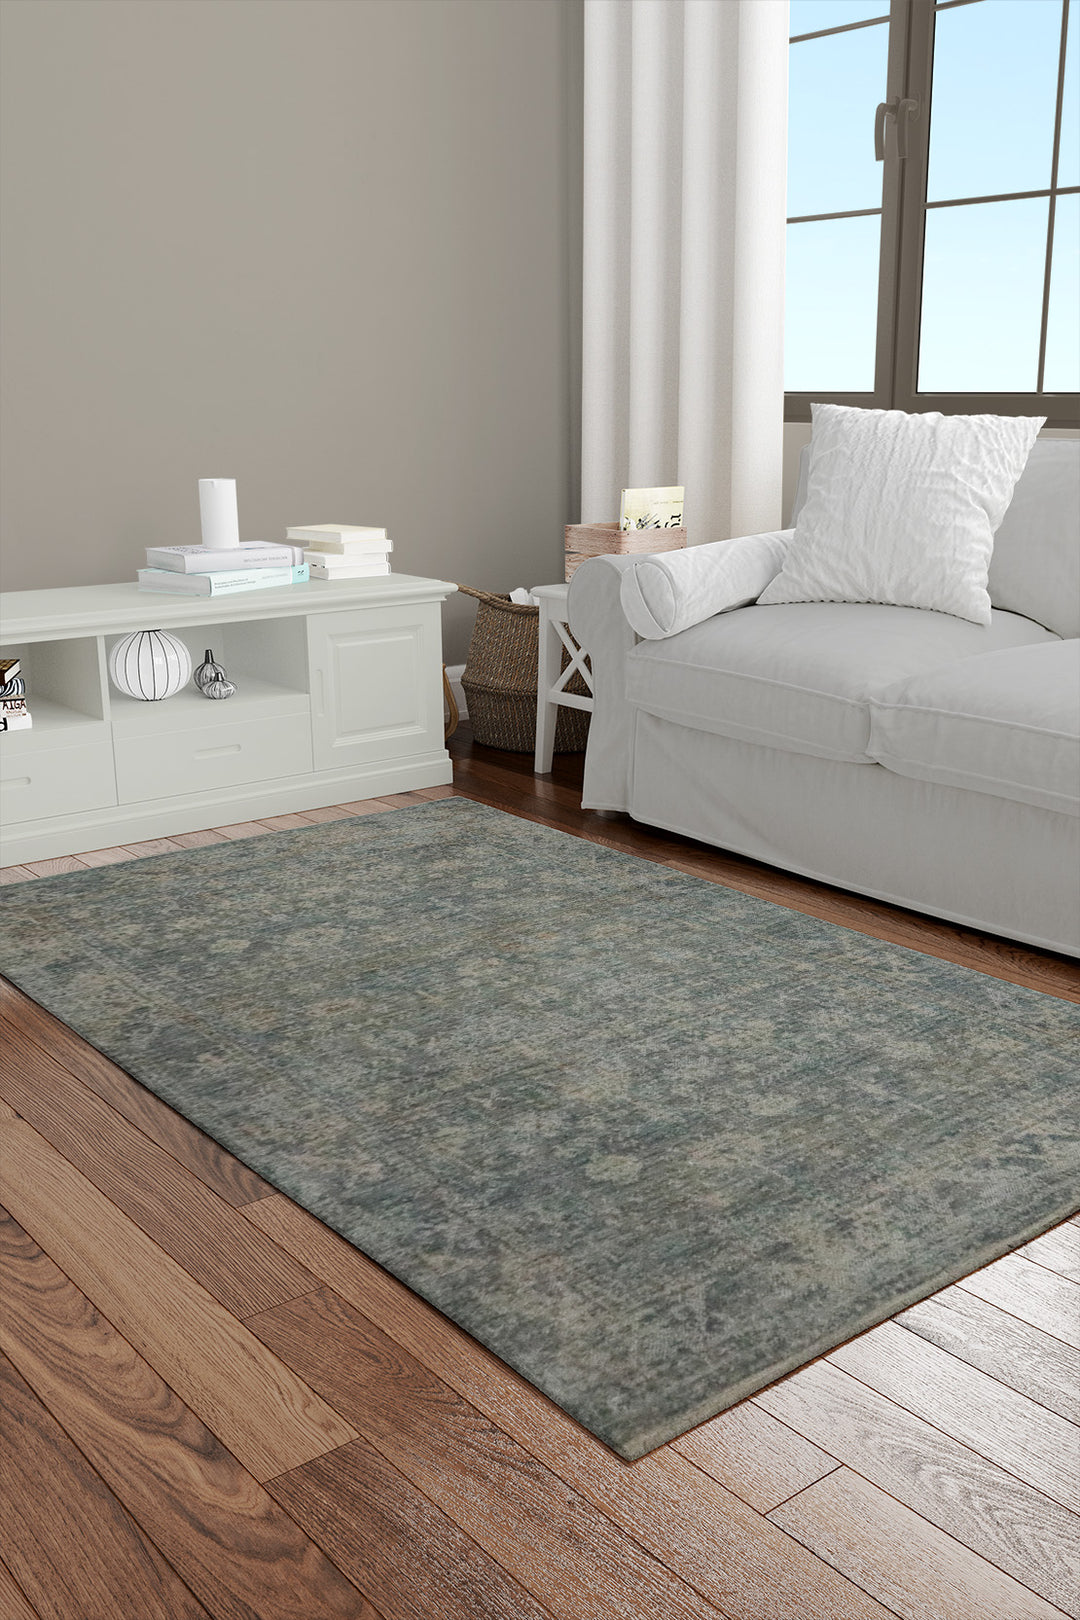 Turkish Modern  Festival Plus Rug - Gray - 3.9 x 5.5 FT - Superior Comfort, Modern Style Accent Rugs